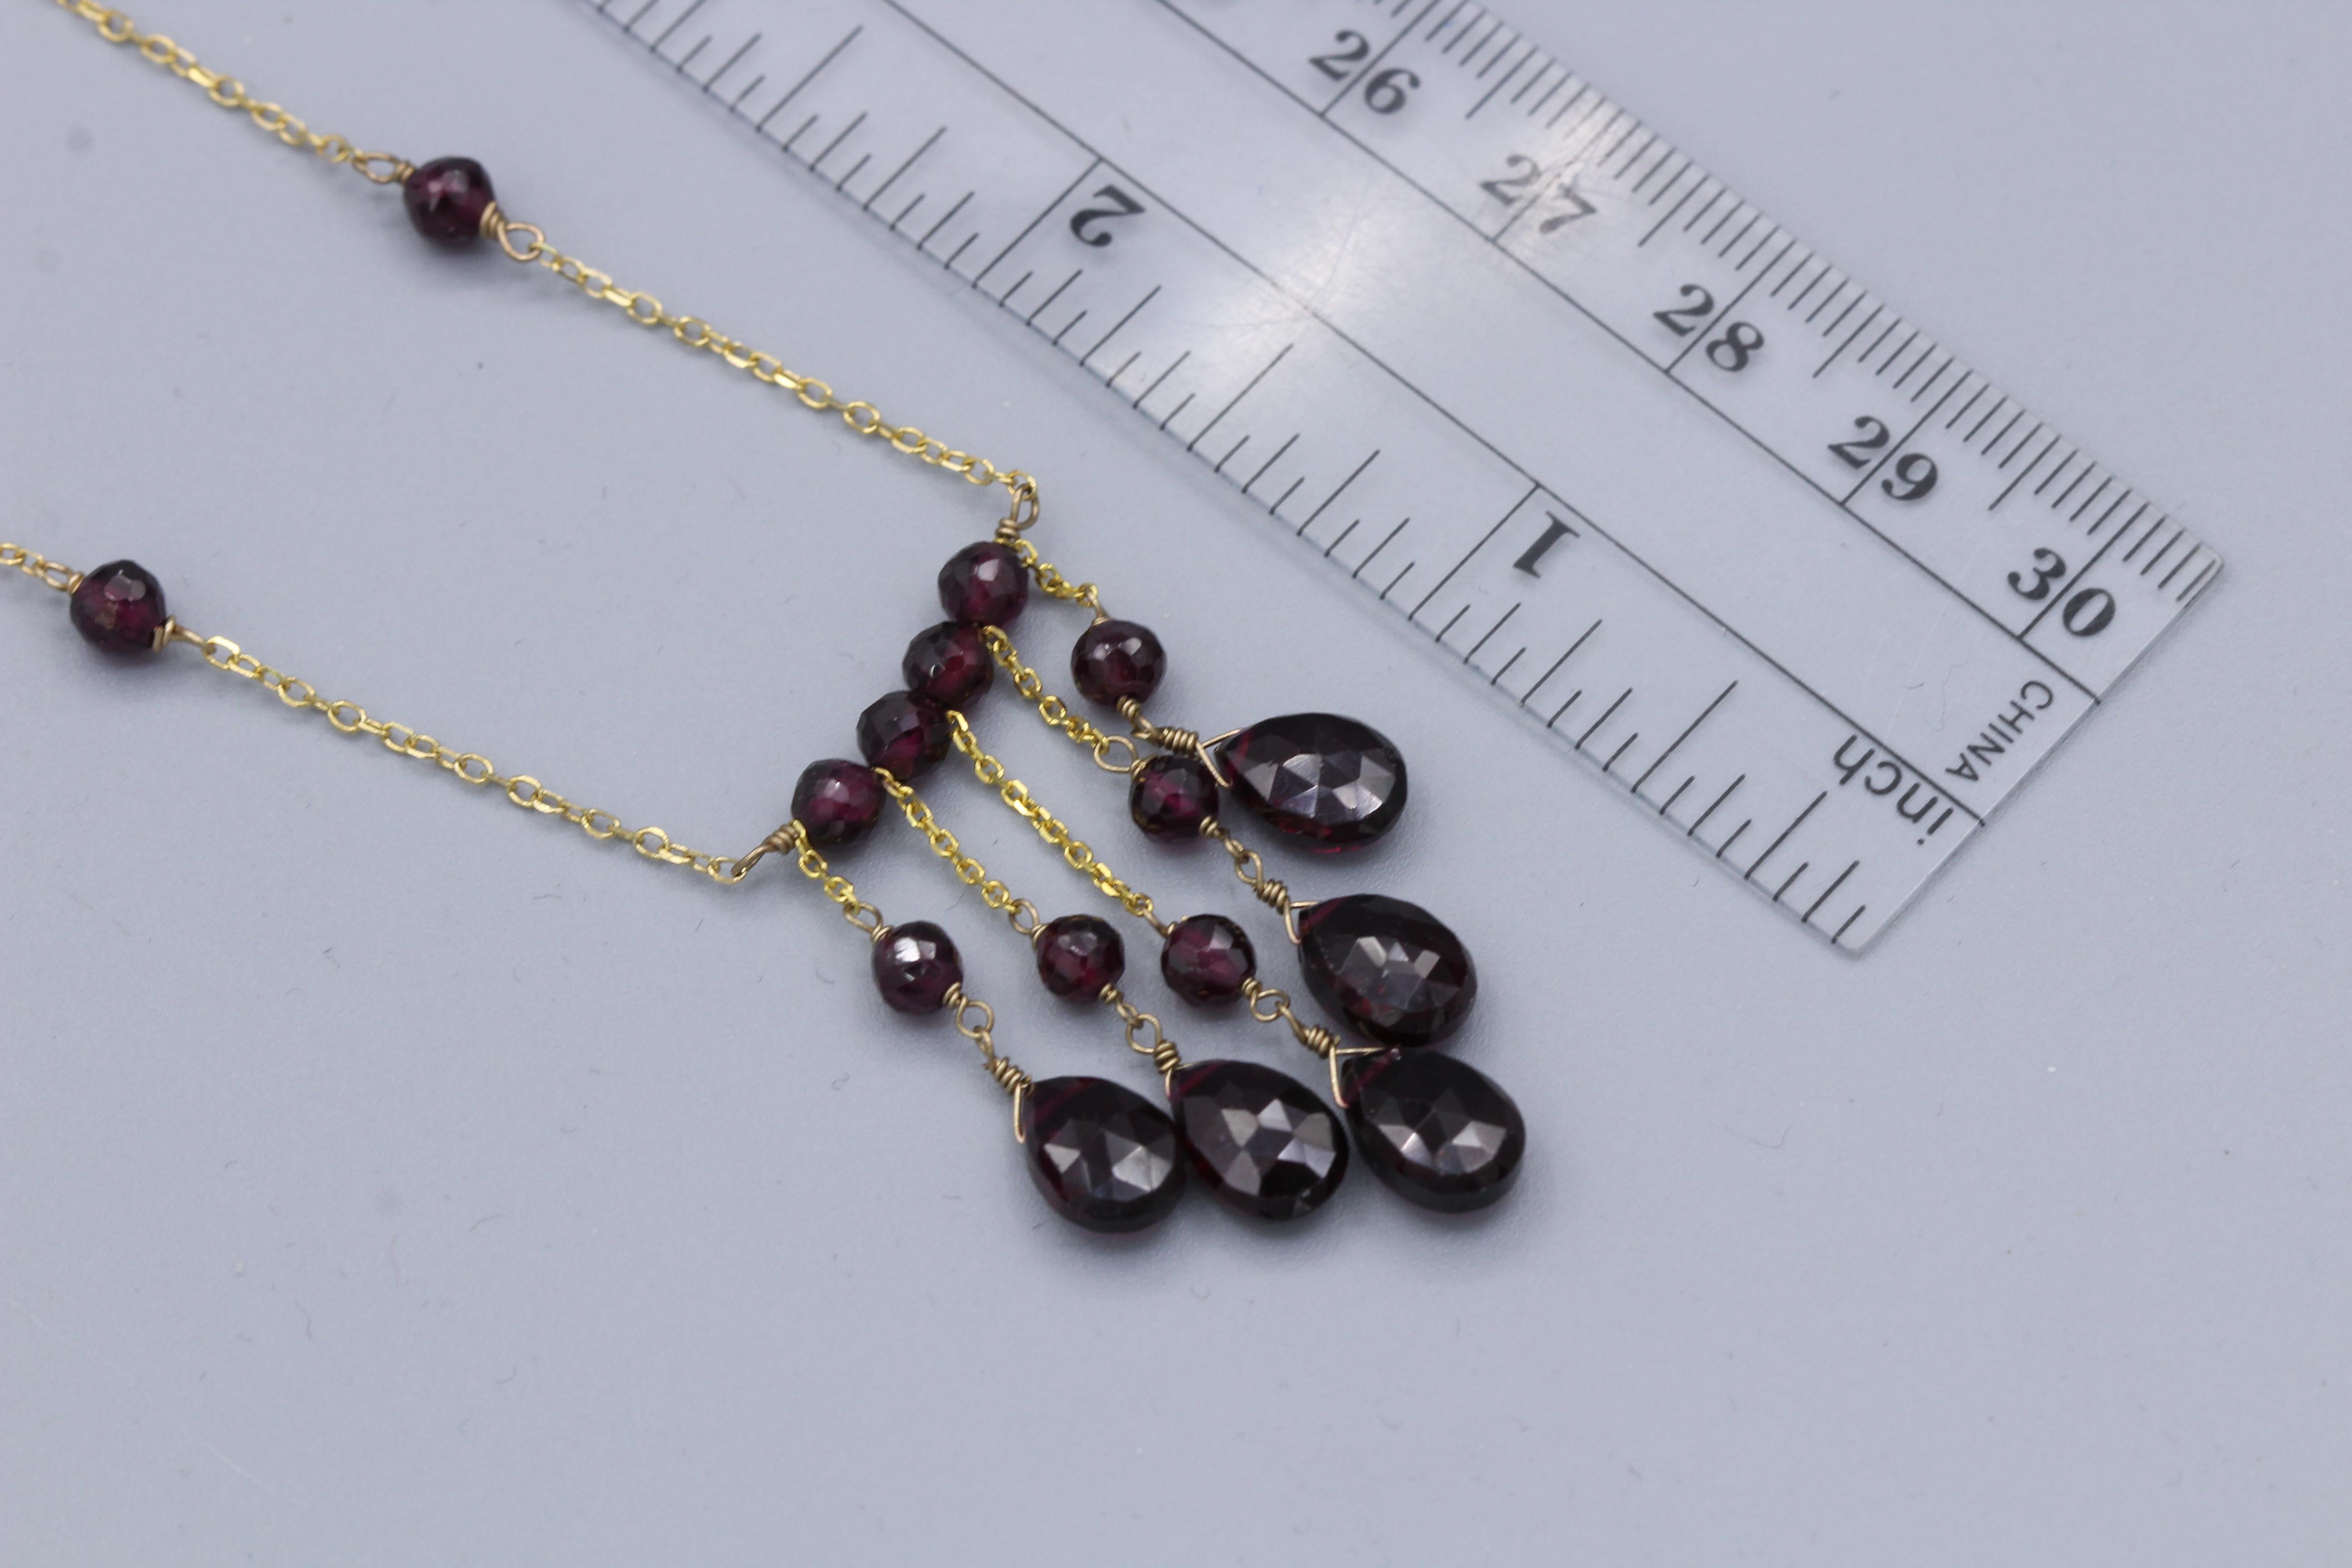 Elegant Dangling Garnet Bead Necklace Wire Style
14k Yellow Gold 
Length 16’ Inch
Dangle length approx. 1.25’ Inch
Natural Garnet Stones approx. 10 x 6mm and  4.0 mm beads
Spring Ring Lock
Total Weight 6.0 grams
